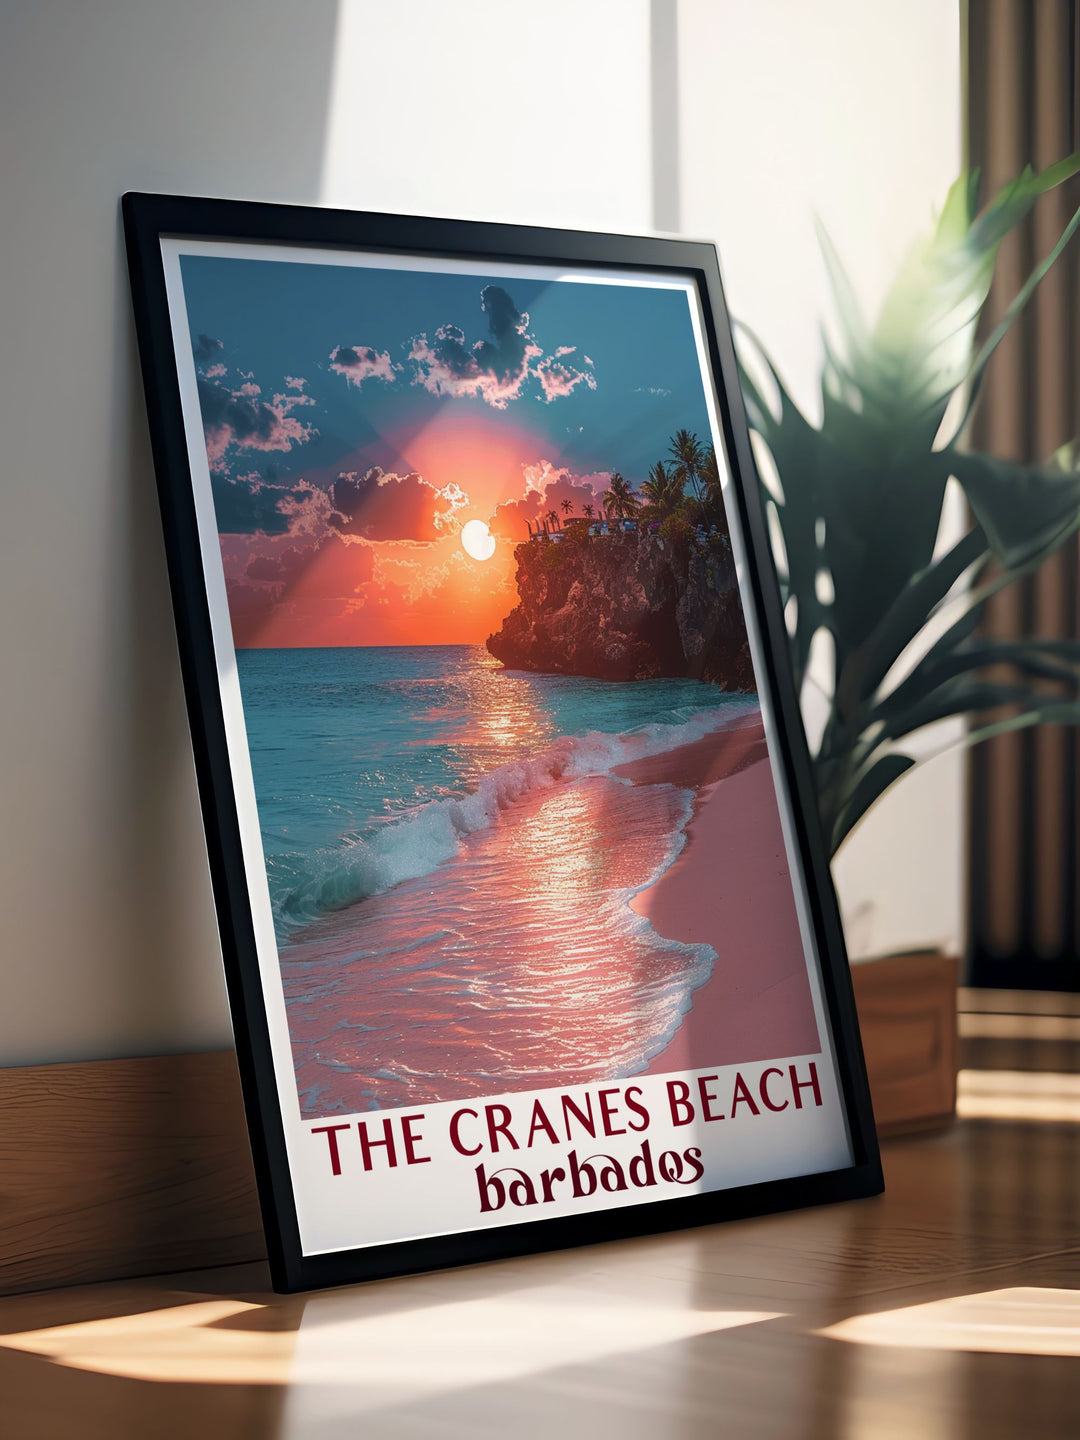 Barbados art print highlighting the islands beautiful coastlines and lush landscapes, ideal for adding a piece of tropical paradise to your home or office.